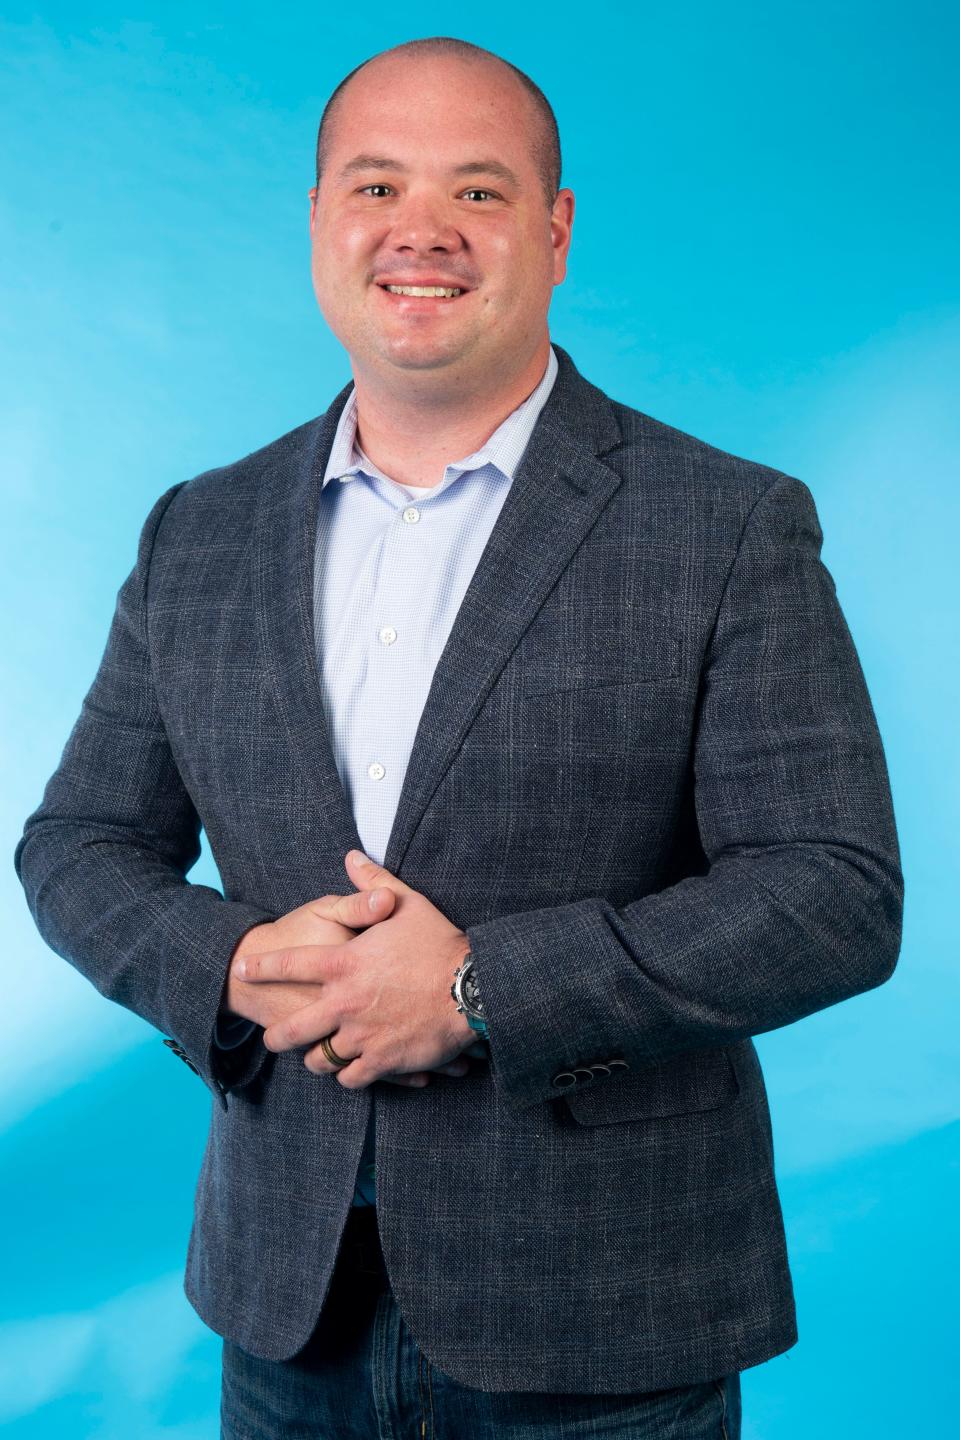 Kyle Mitchell, Program Manager, Consolidated Nuclear Security, LLC, 40 under 40 Class of 2021. Pictured in Knoxville, Tenn. on Wednesday, Oct. 27, 2021.